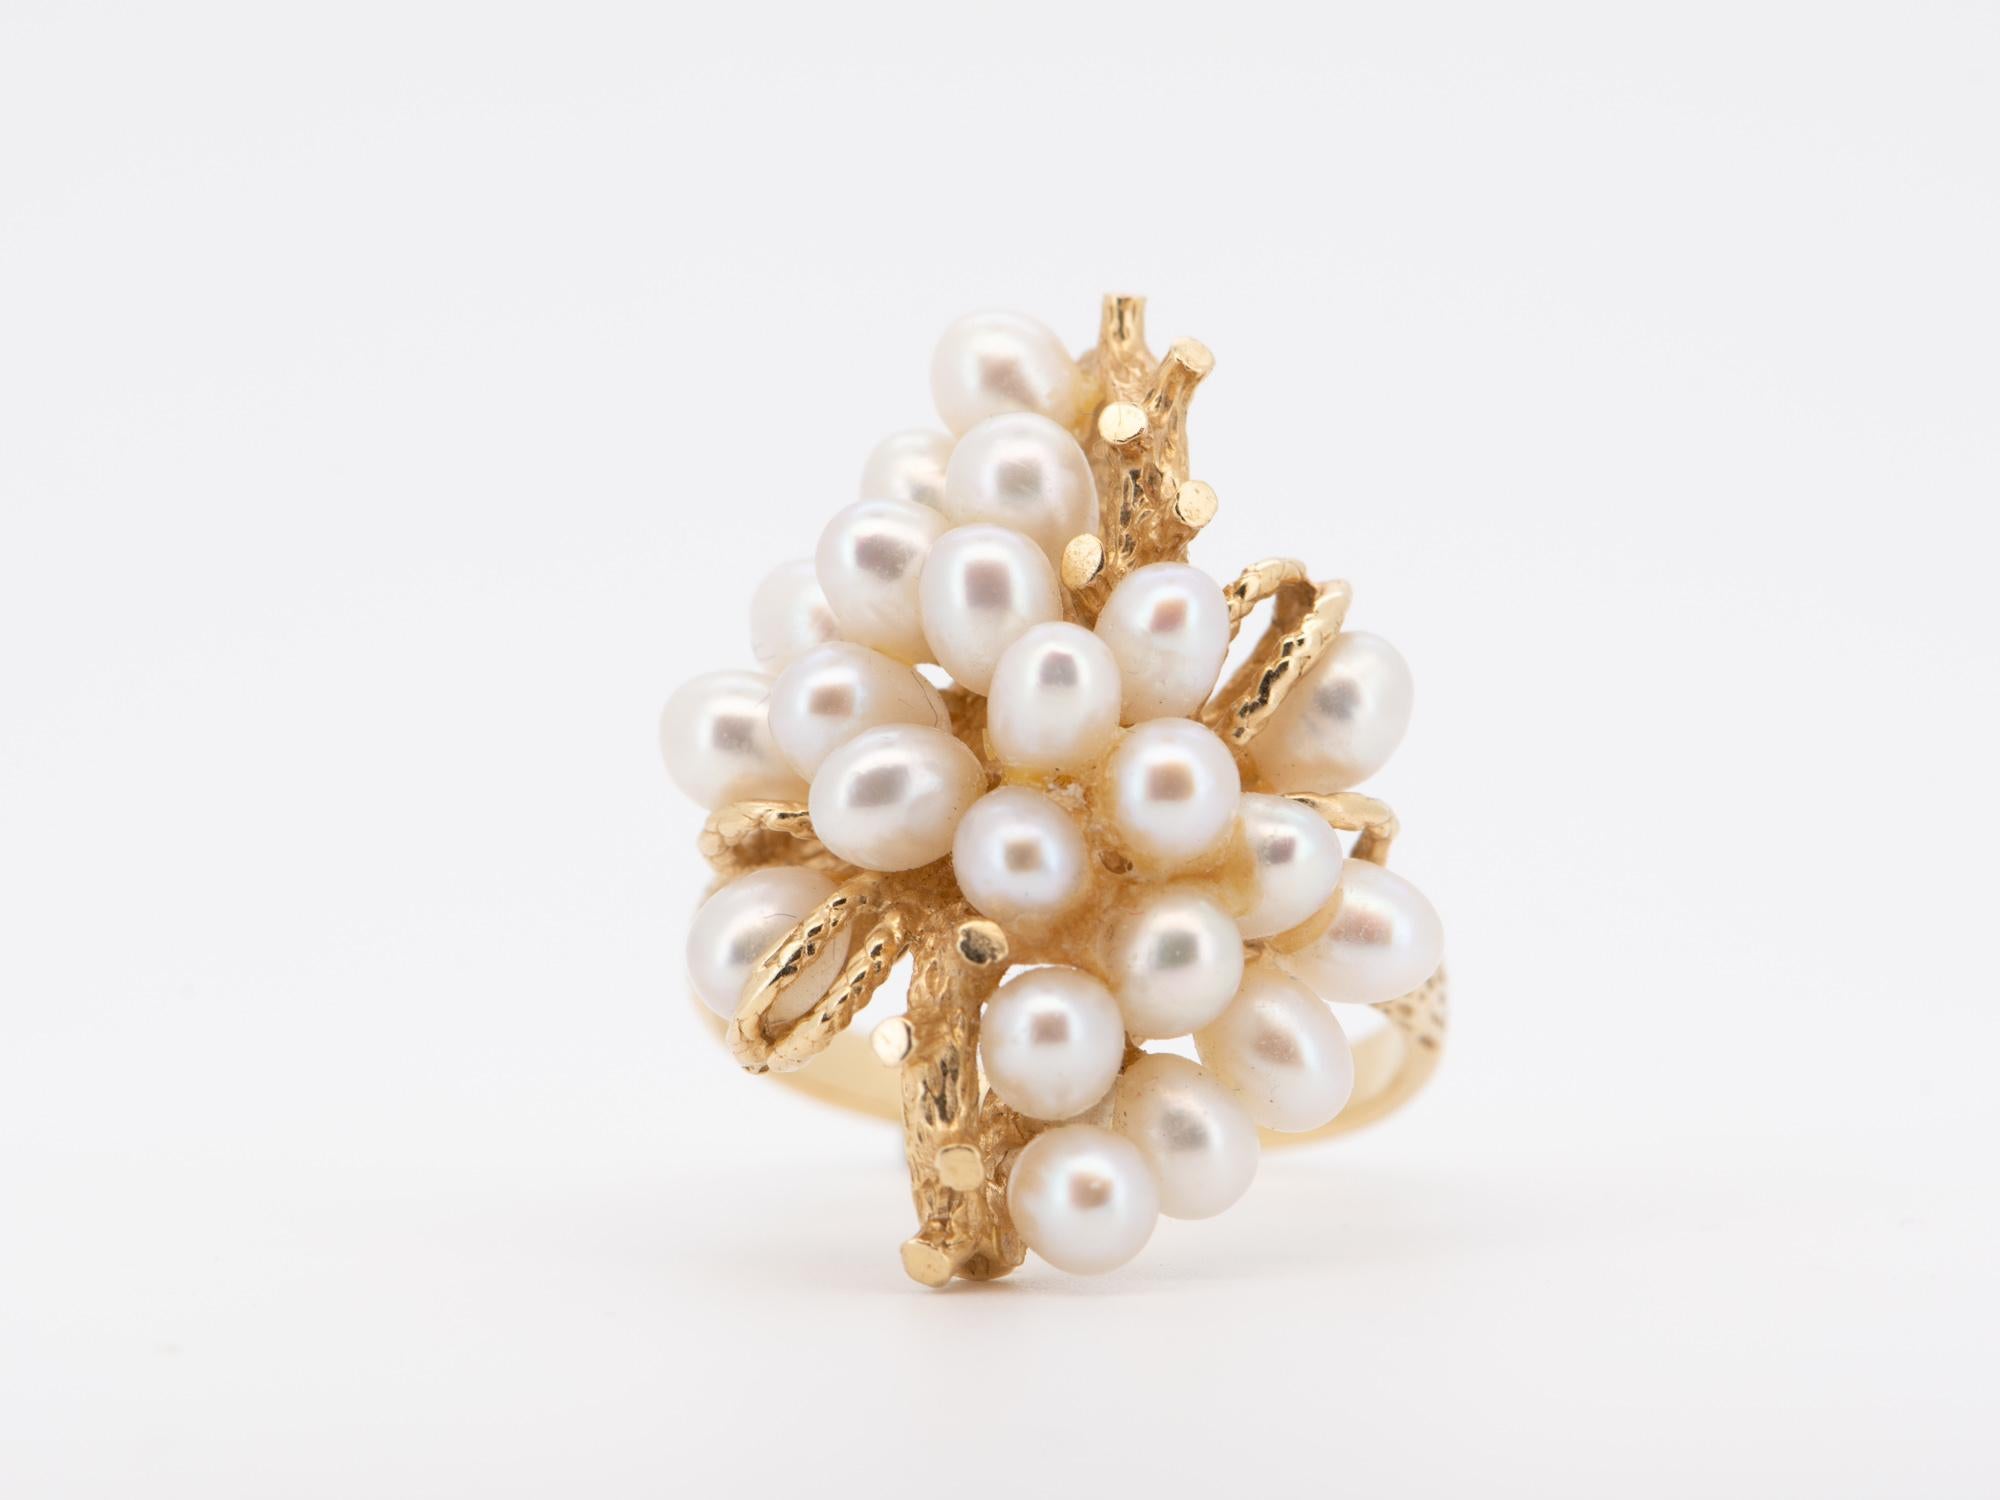 ♥ A stunning cluster design ring set with freshwater pearls with beautiful luster
♥ The setting has some nice texture and is in a modernist/organic branch design to counter the perfect smoothness of the pearls, creating a unique floral bouquet